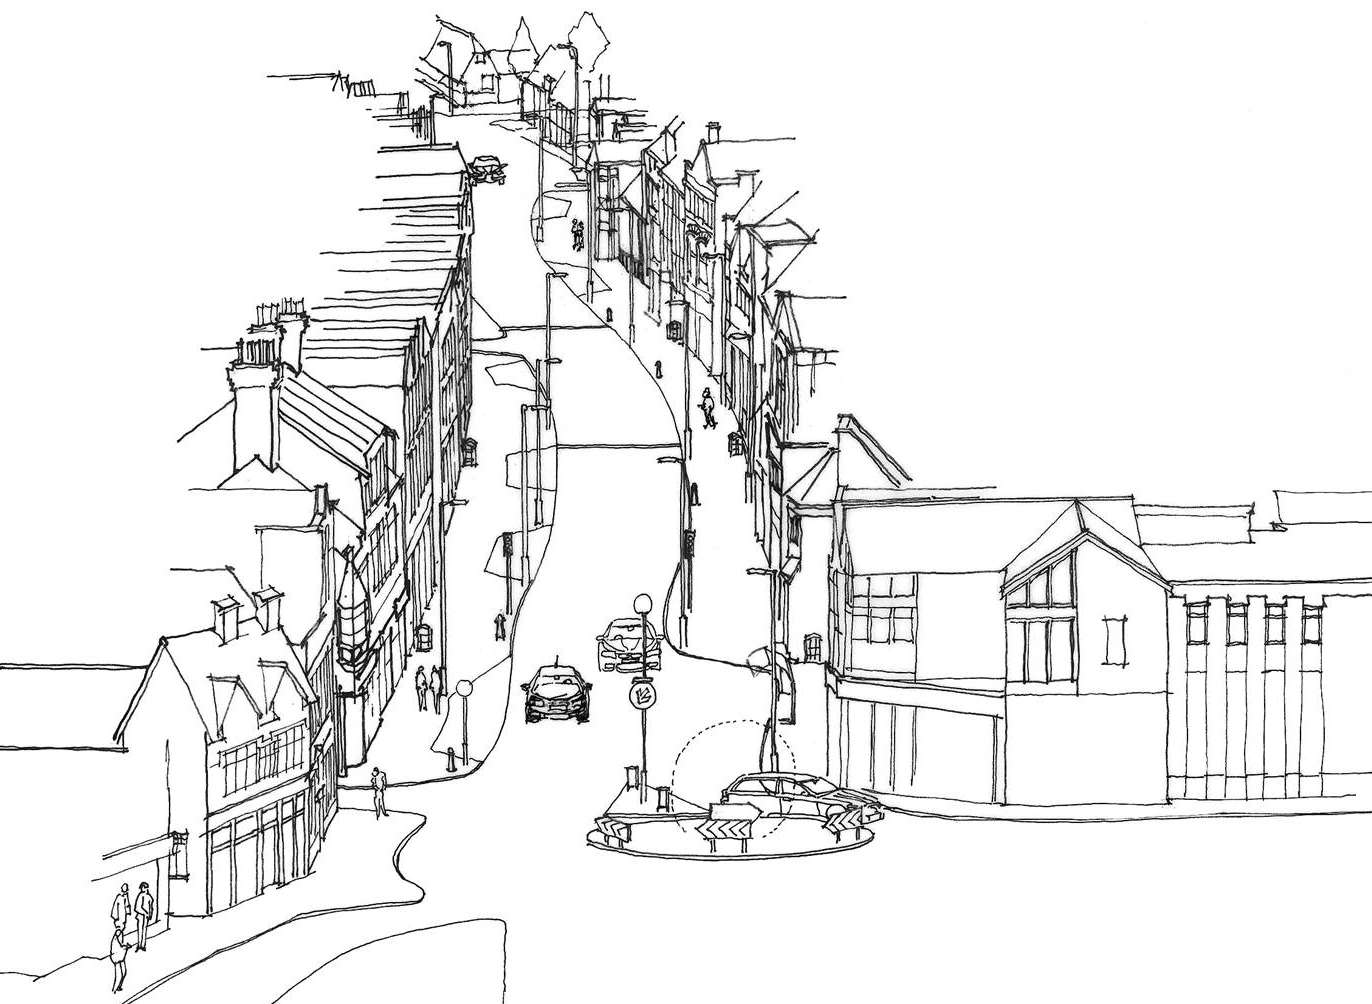 An artist's impression of the High Street